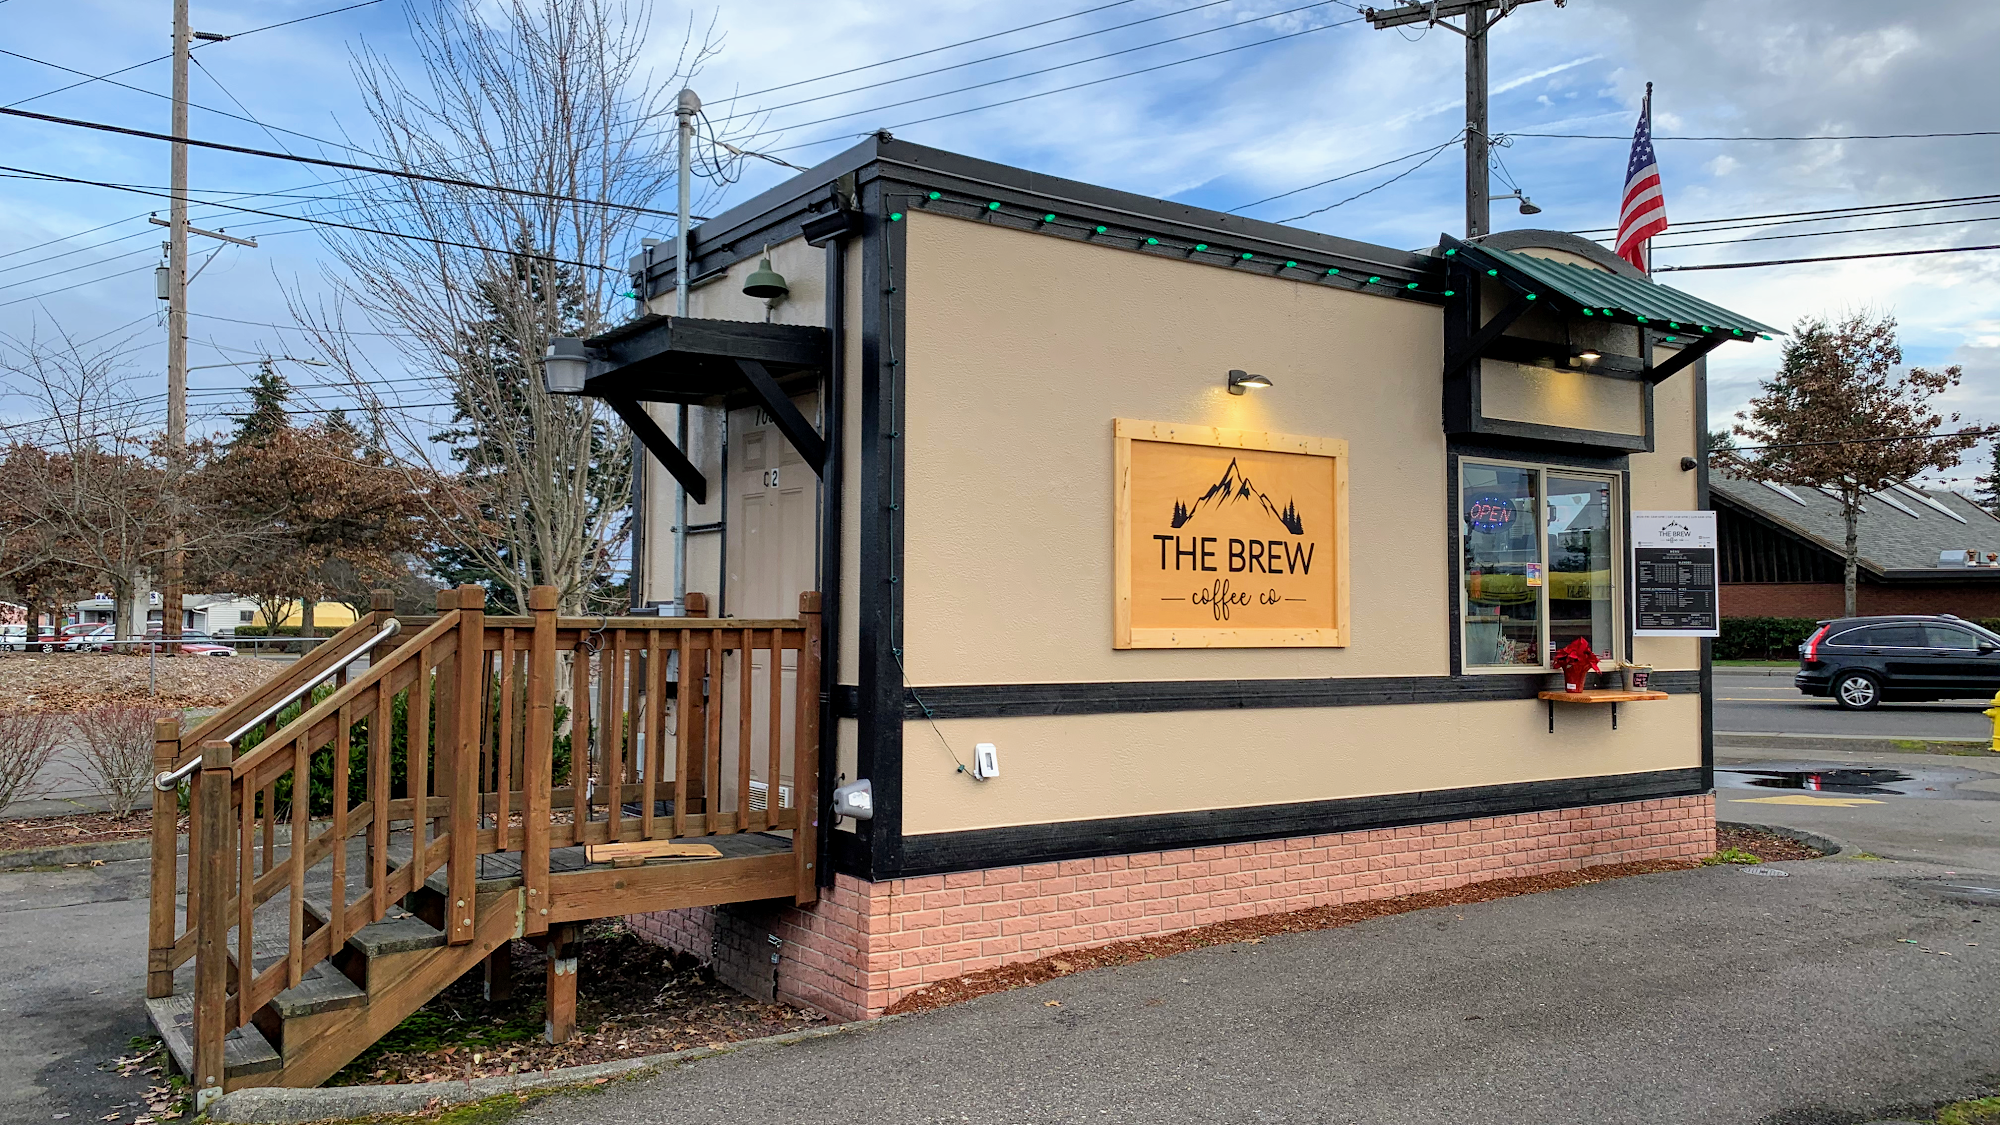 The Brew Coffee Co